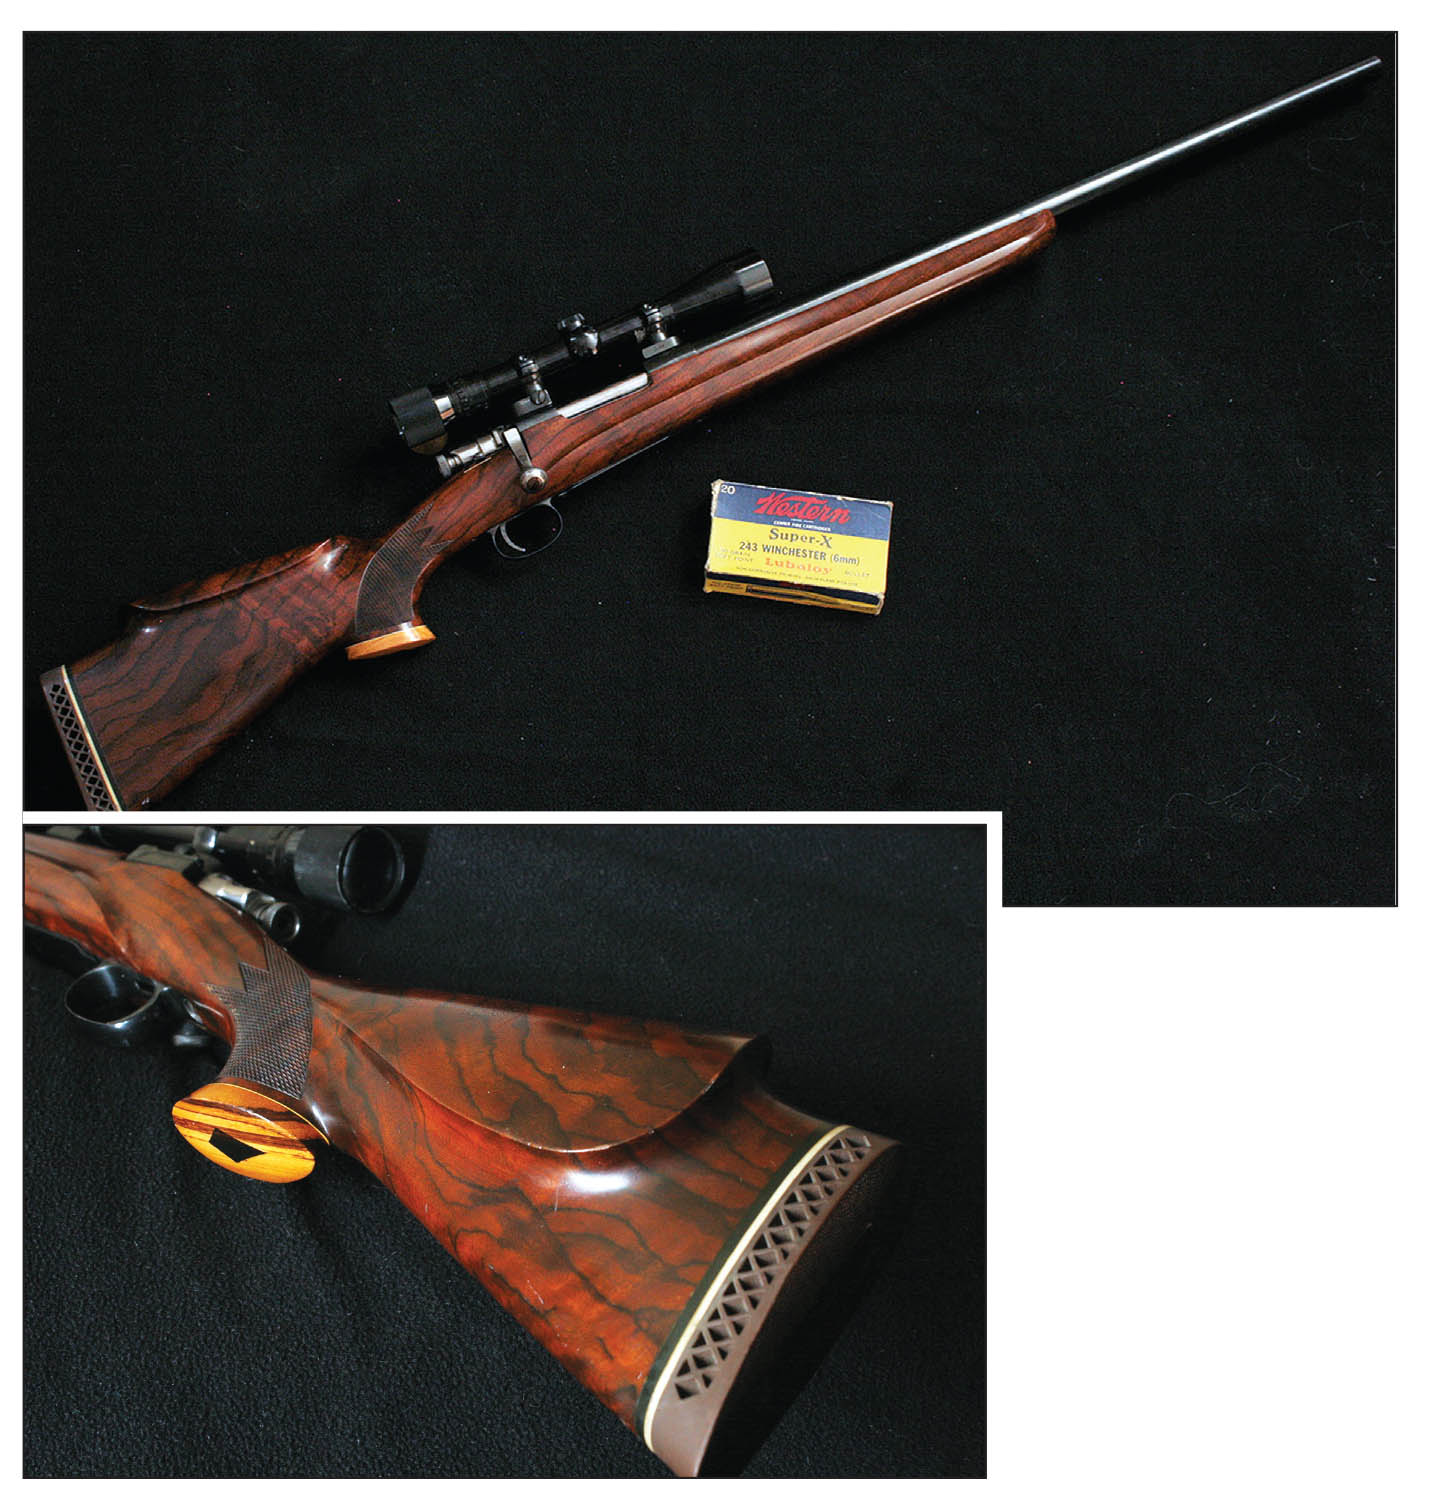 The Mexican .243 Winchester’s style resembles Anthony Guymon’s, minus some details.